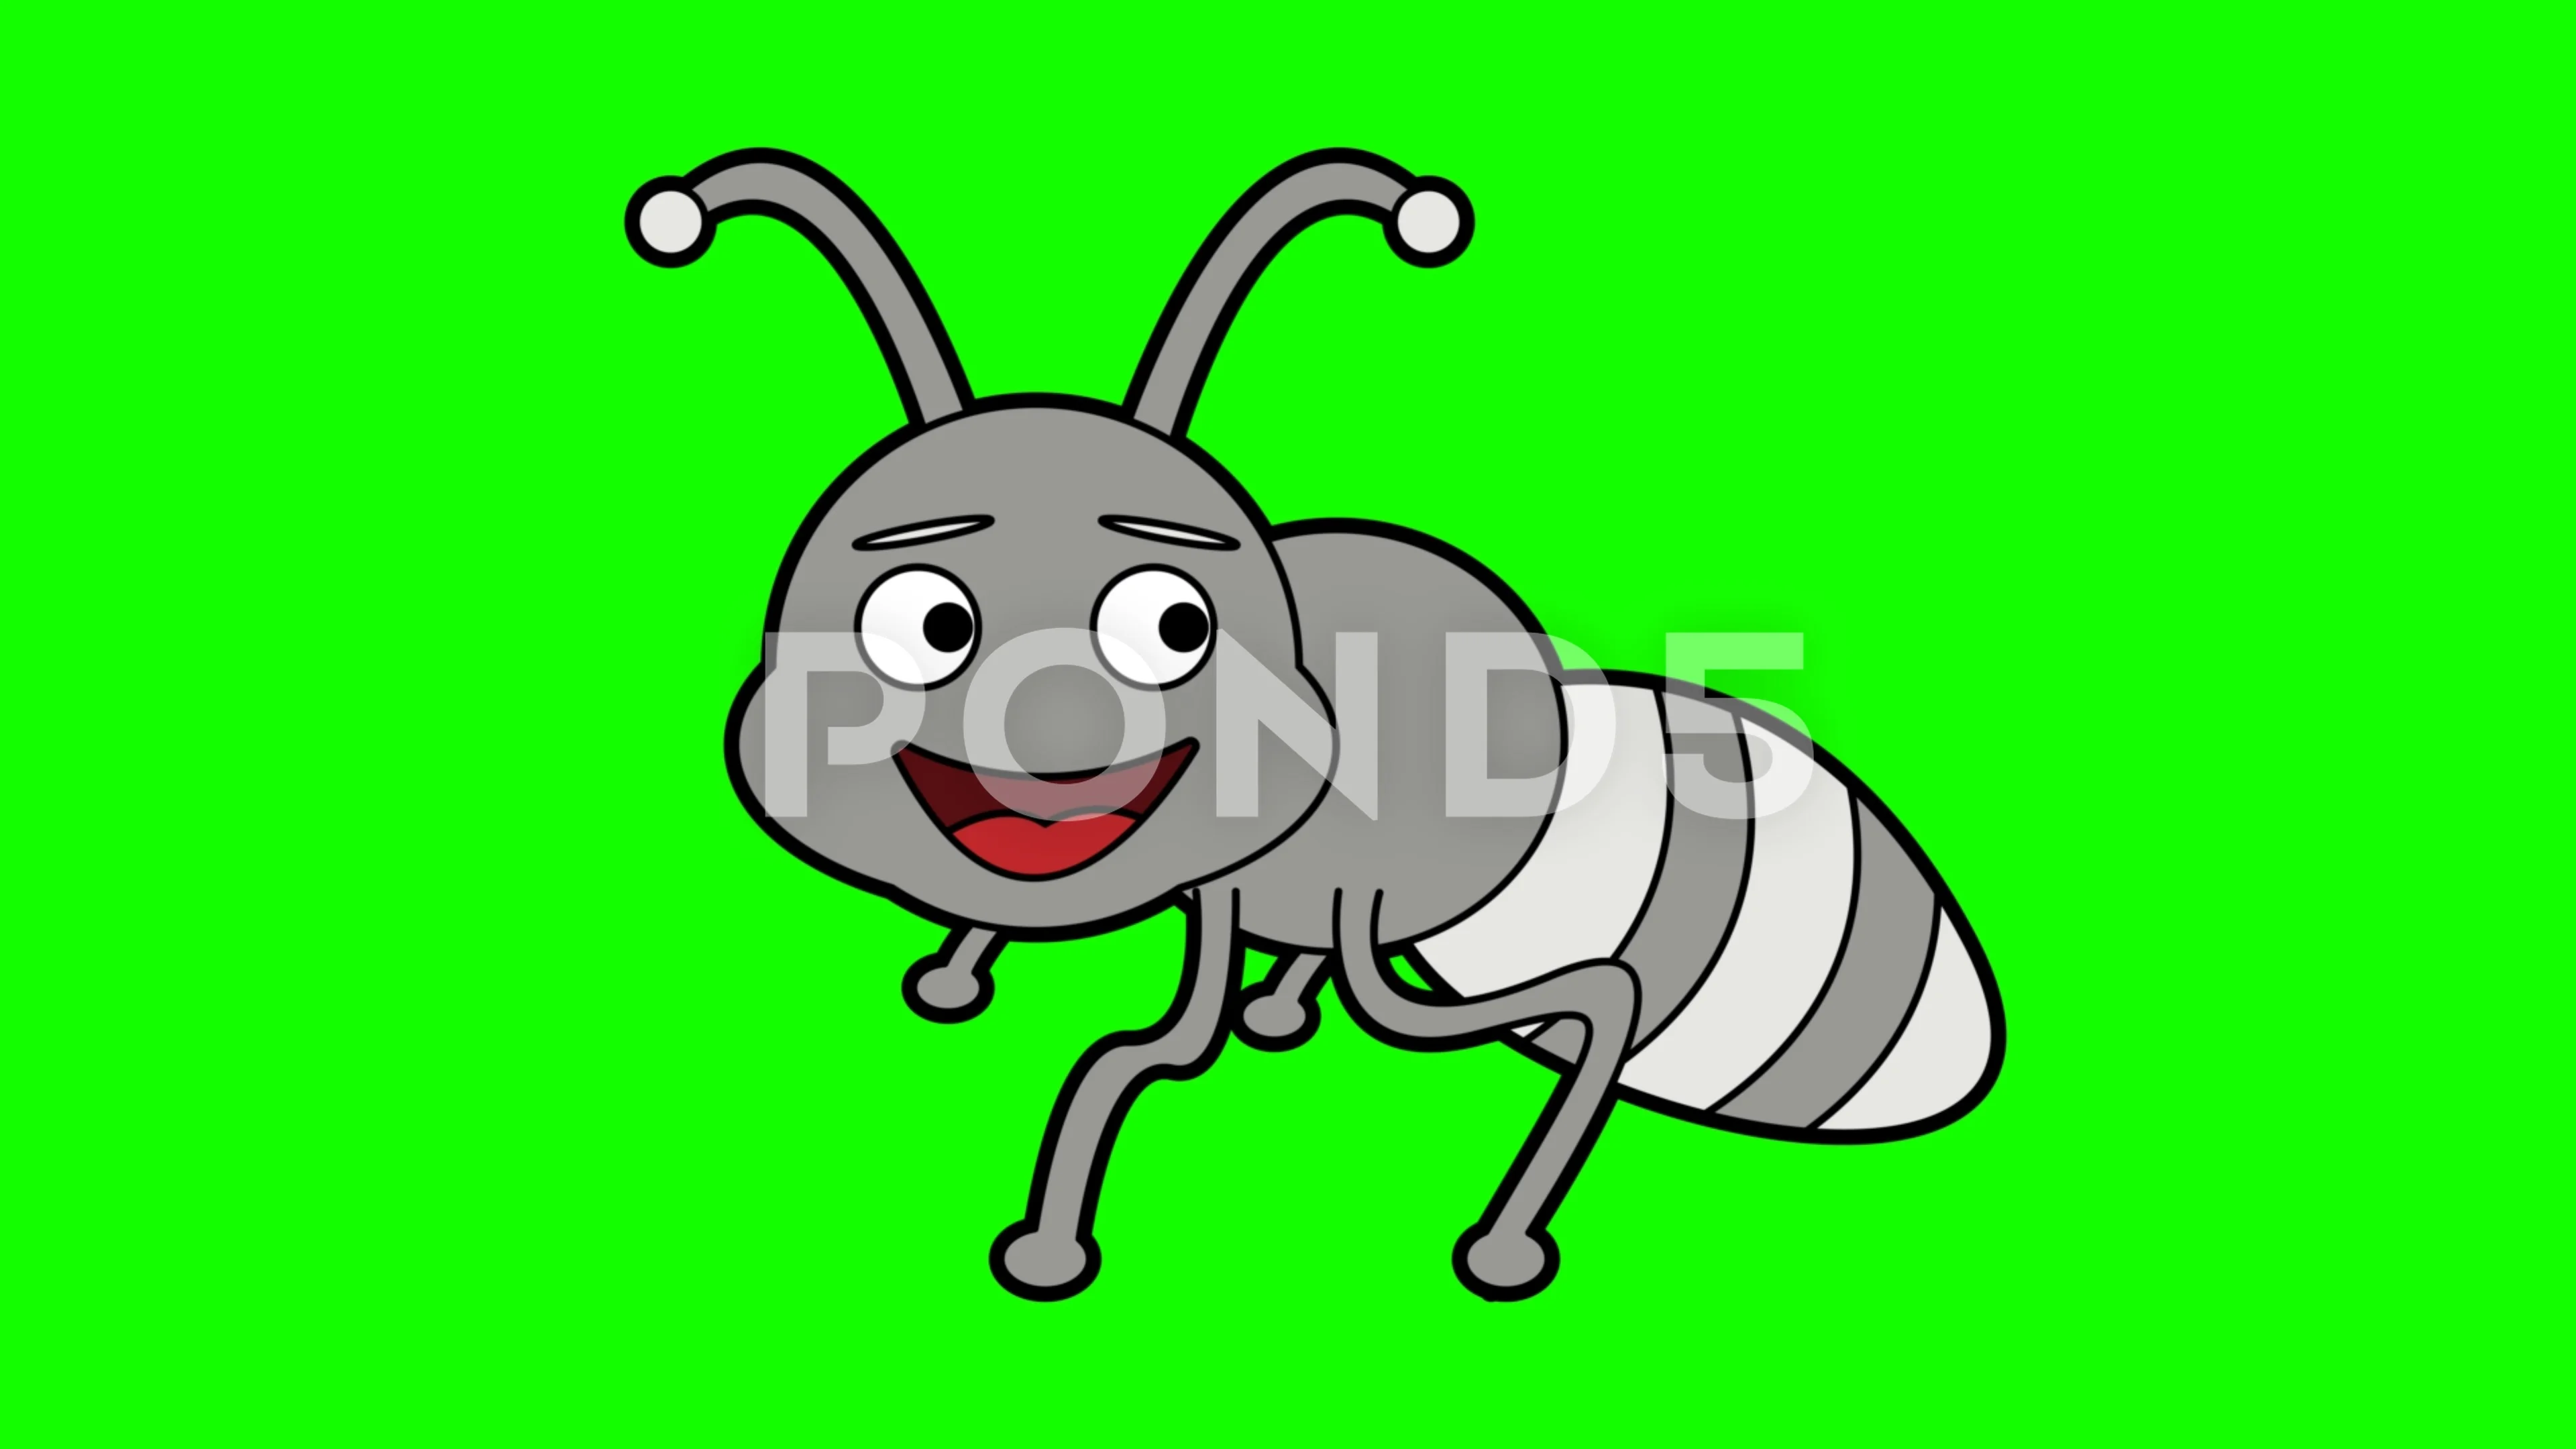 ant character animation green screen. 2D... | Stock Video | Pond5